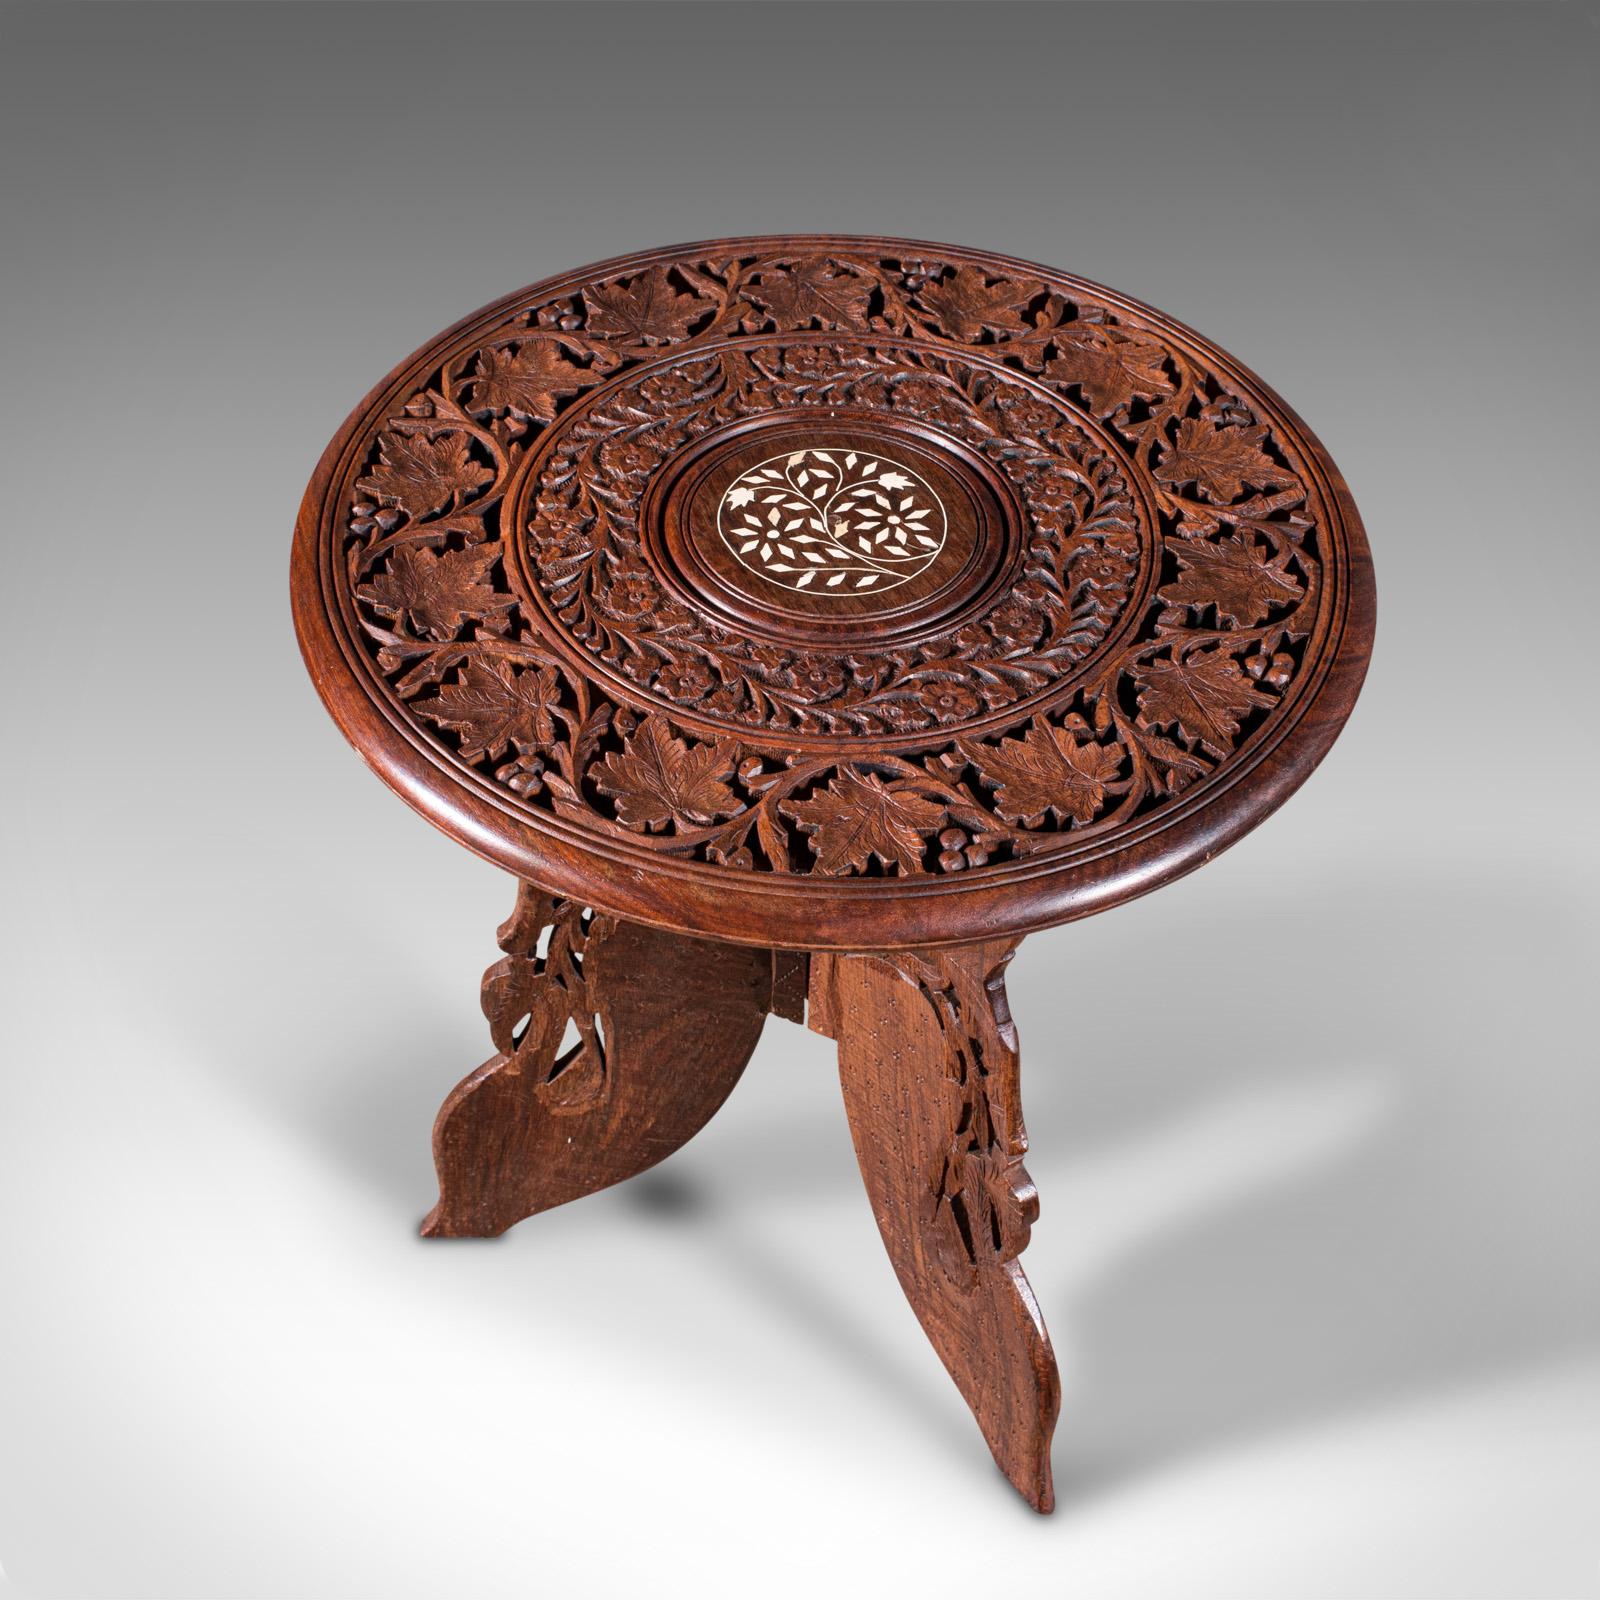 20th Century Antique Circular Side Table, Anglo-Indian, Fold Away, Lamp, Wine, Moorish Taste For Sale